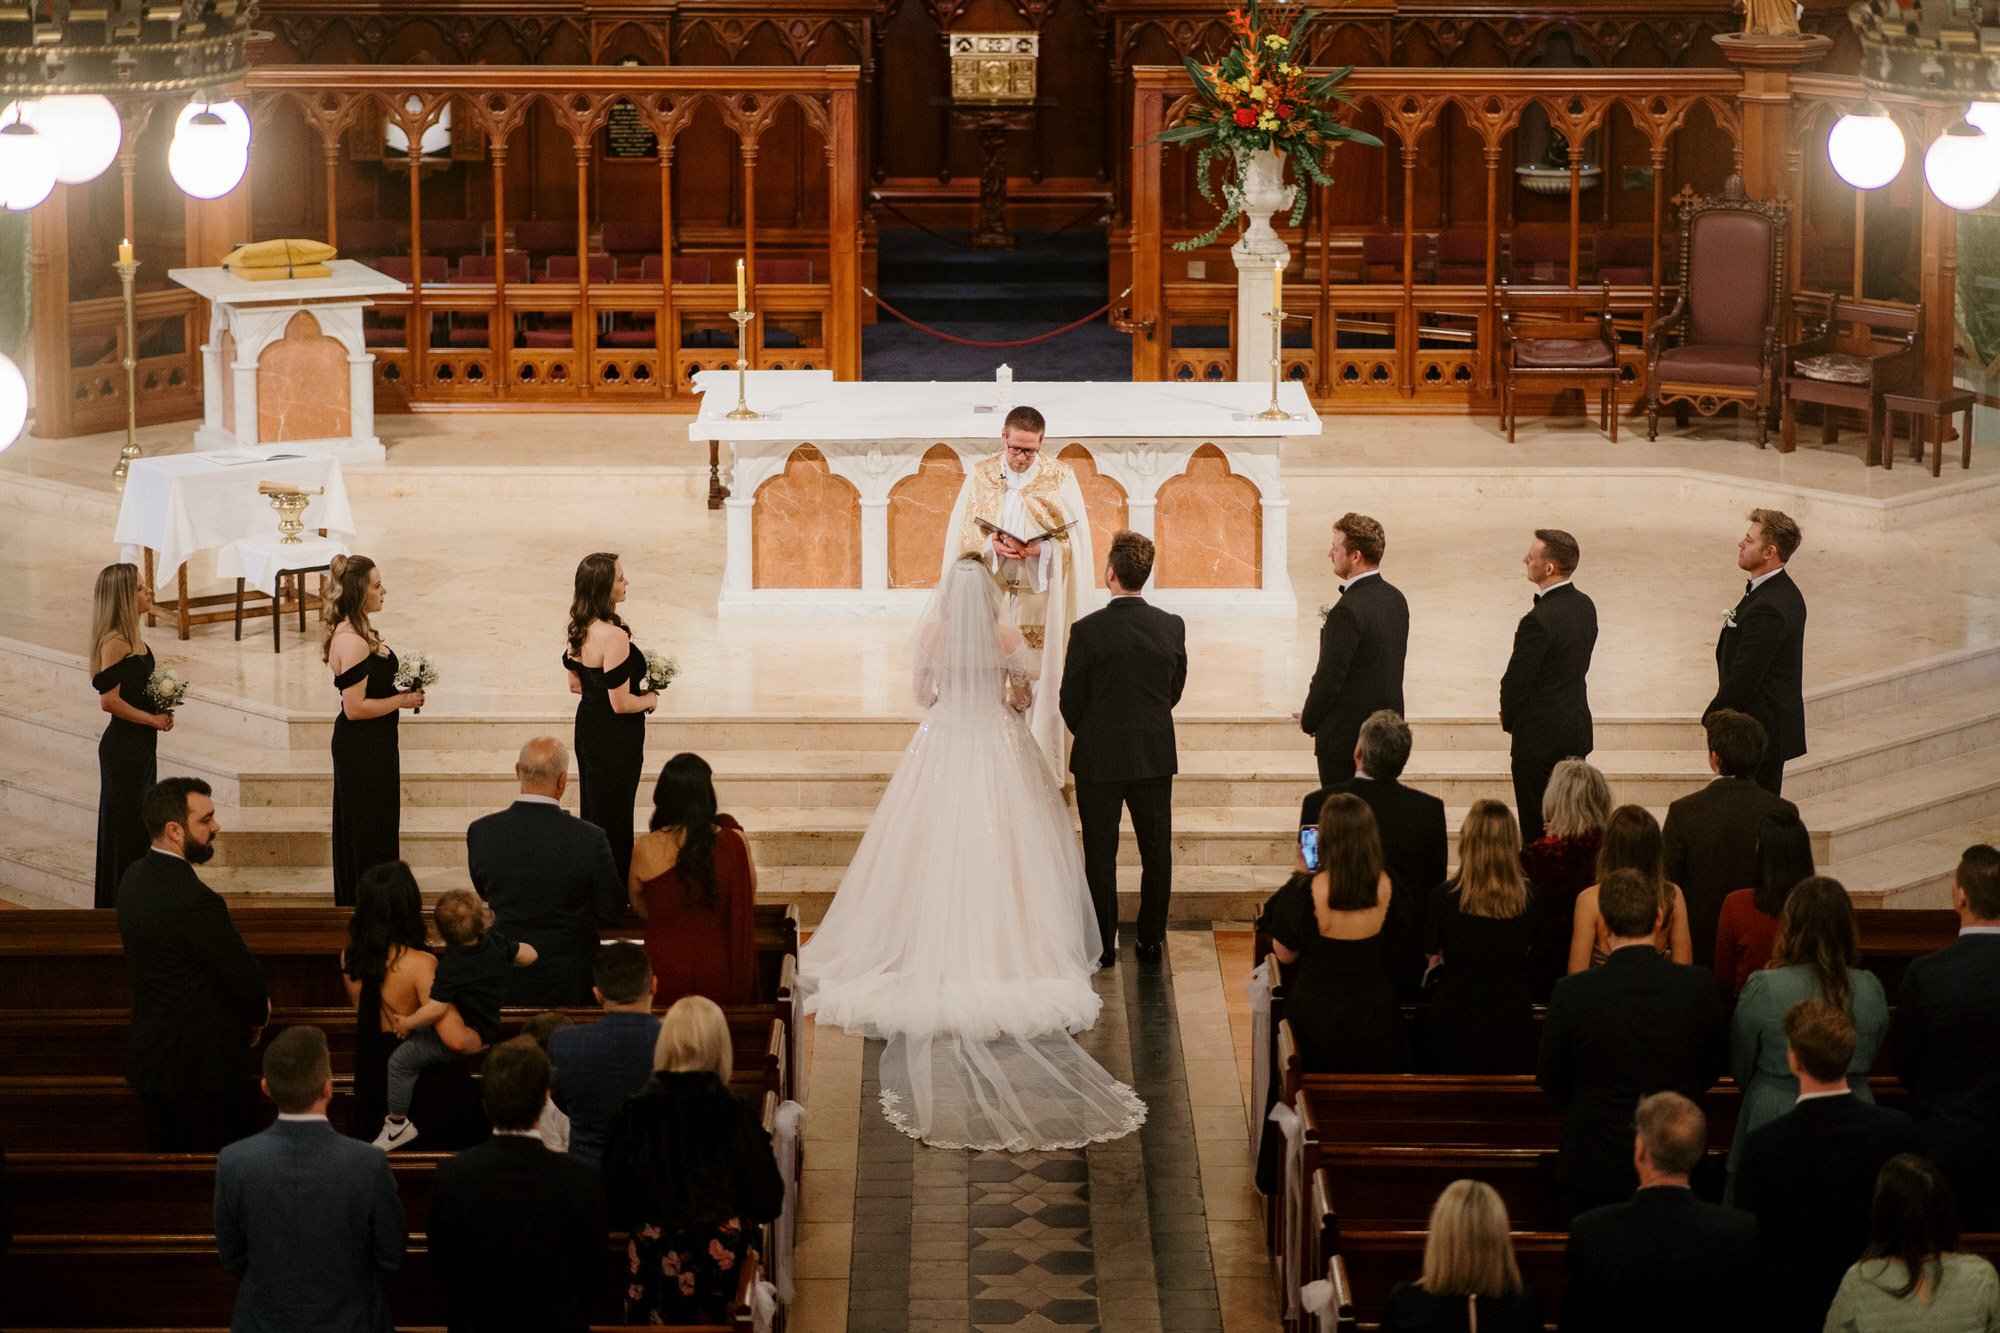 mantells-mt-eden-st-patricks-cathedral-alberton-house-top-auckland-wedding-phtographer-2023-photography-videography-film-new-zealand-NZ-best-urban-venue-catholic-ceremony-dear-white-productions (148).jpg